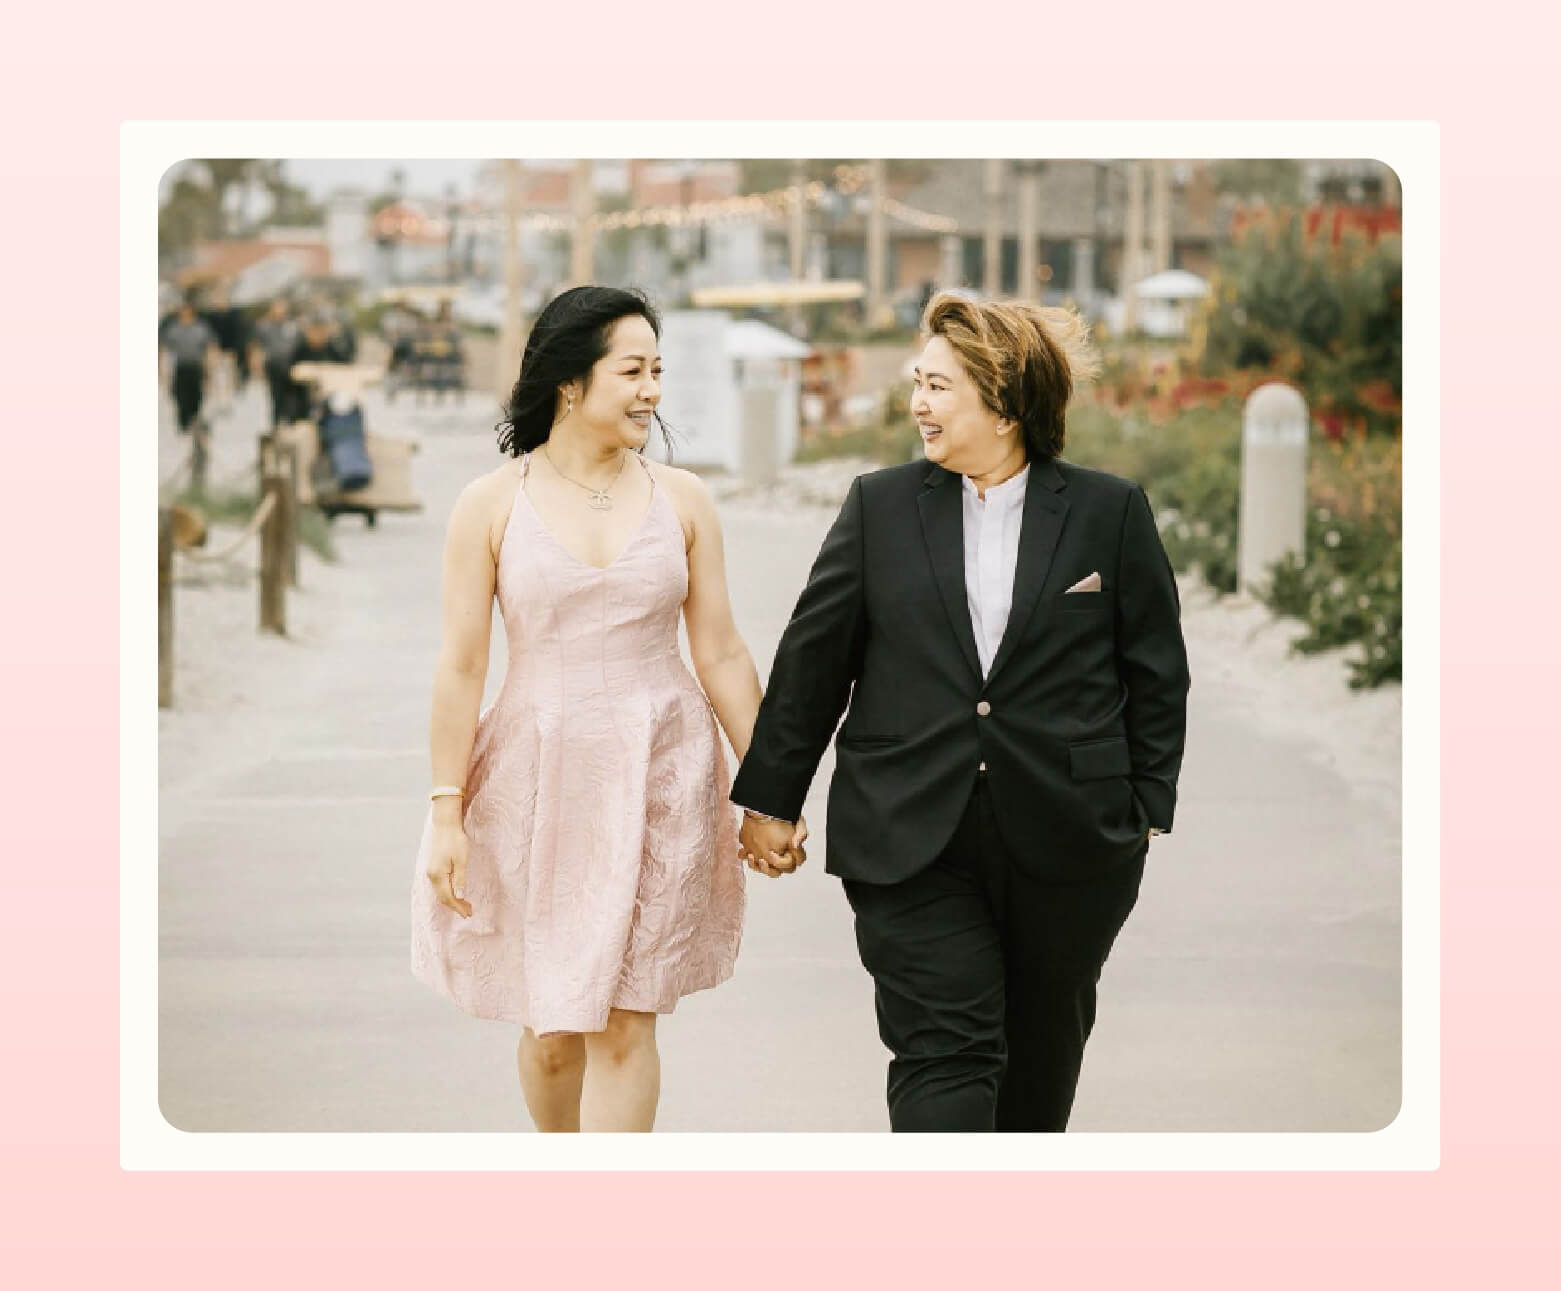 Couple walks holding hands, one wearing black suit from Thúy Custom Clothier and the other wearing a pale pink knee-length dress